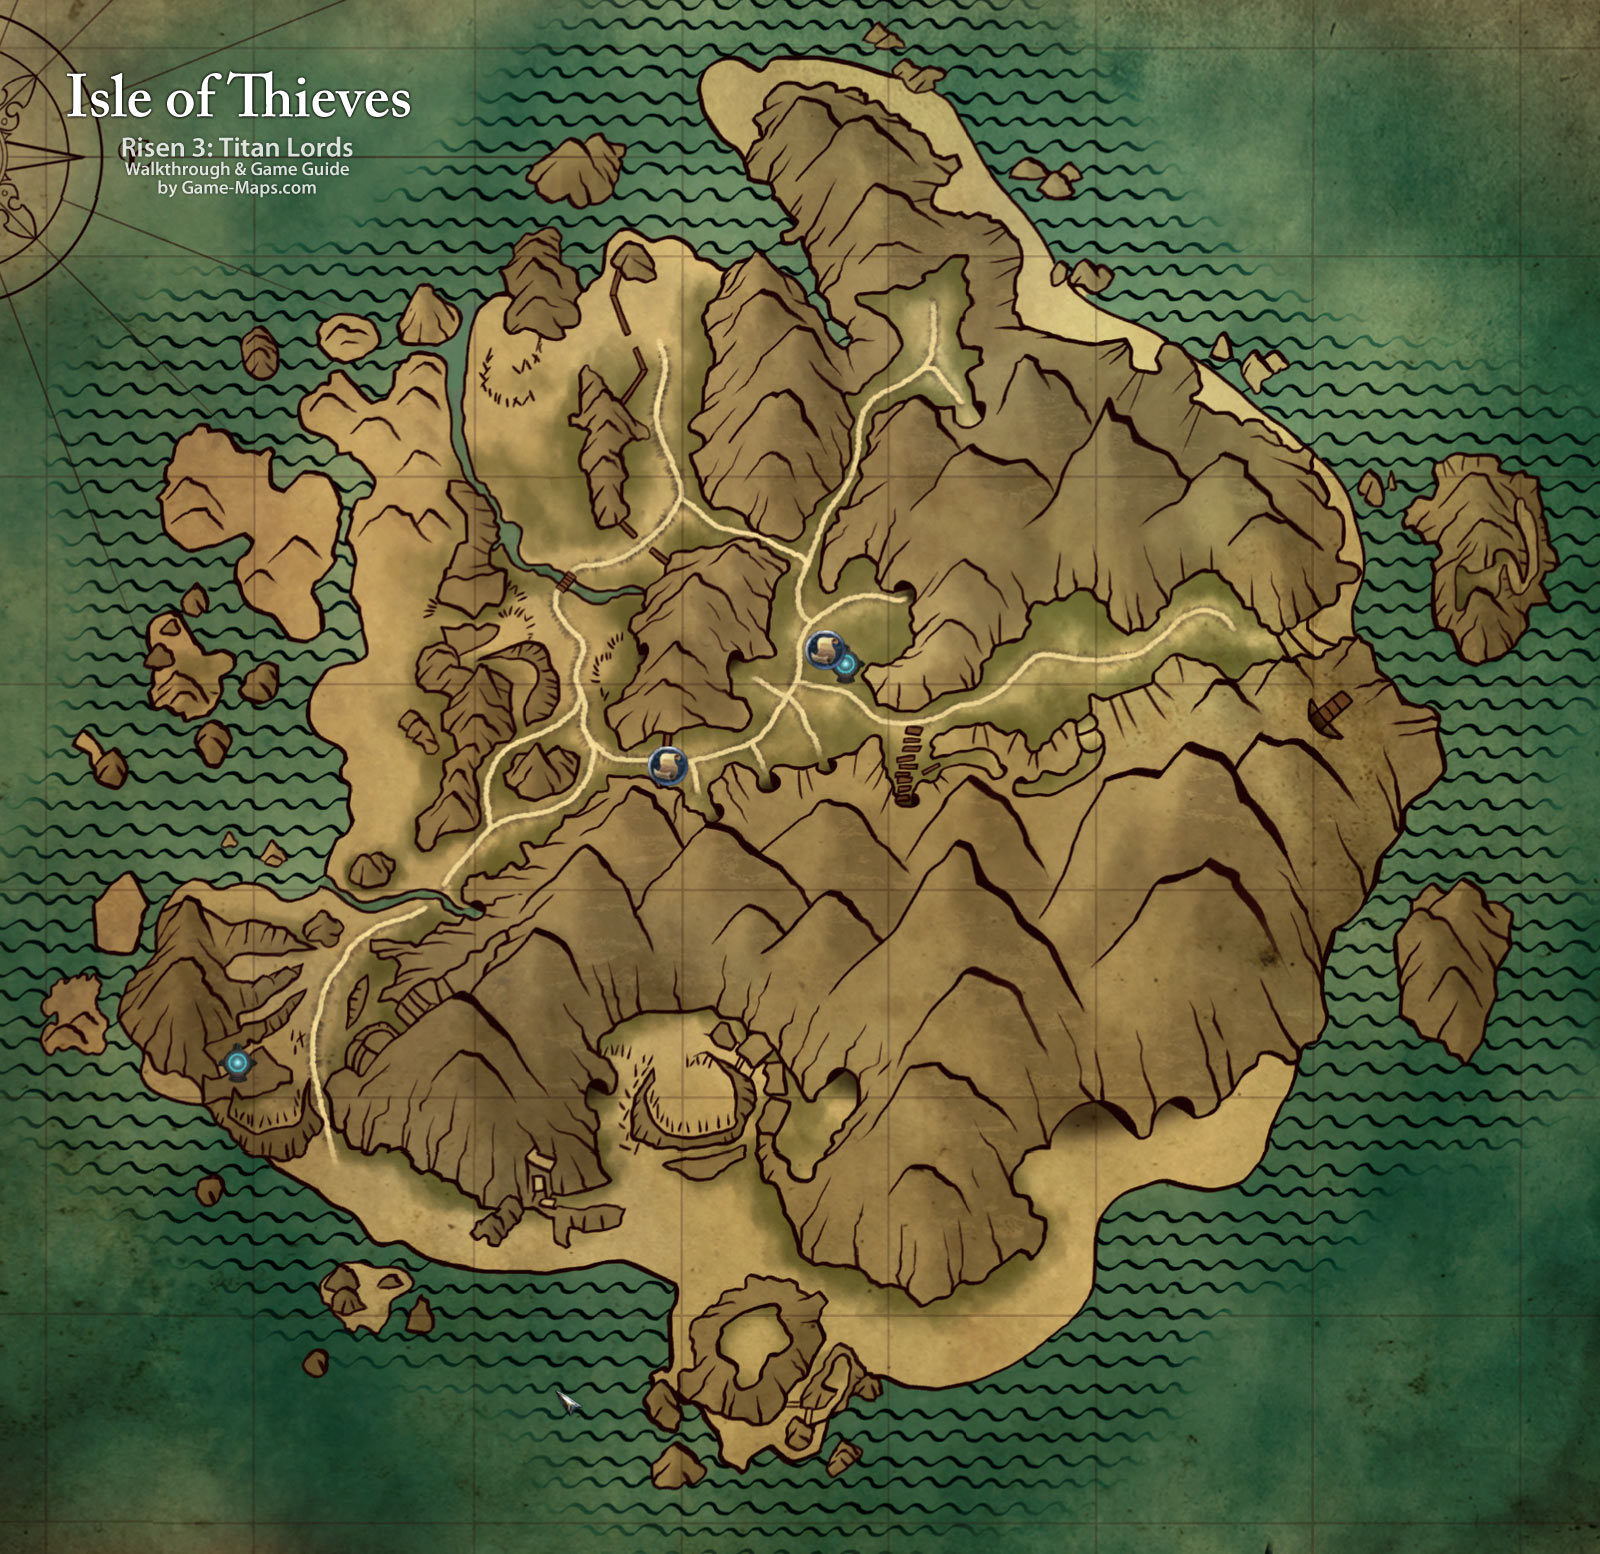 Map of Isle of Thieves - Risen 3 Titan Lords